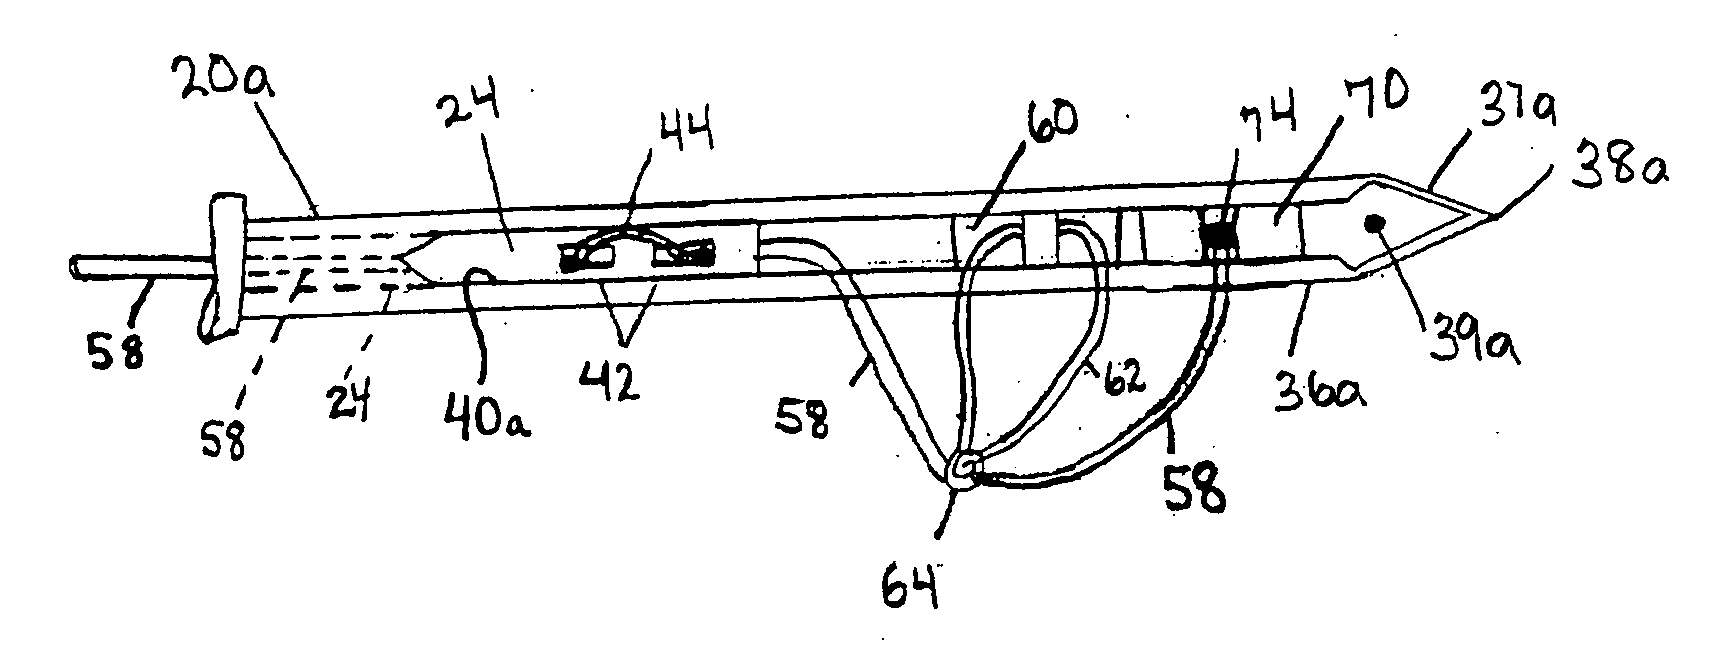 System and method for all-inside suture fixation for implant attachment and soft tissue repair